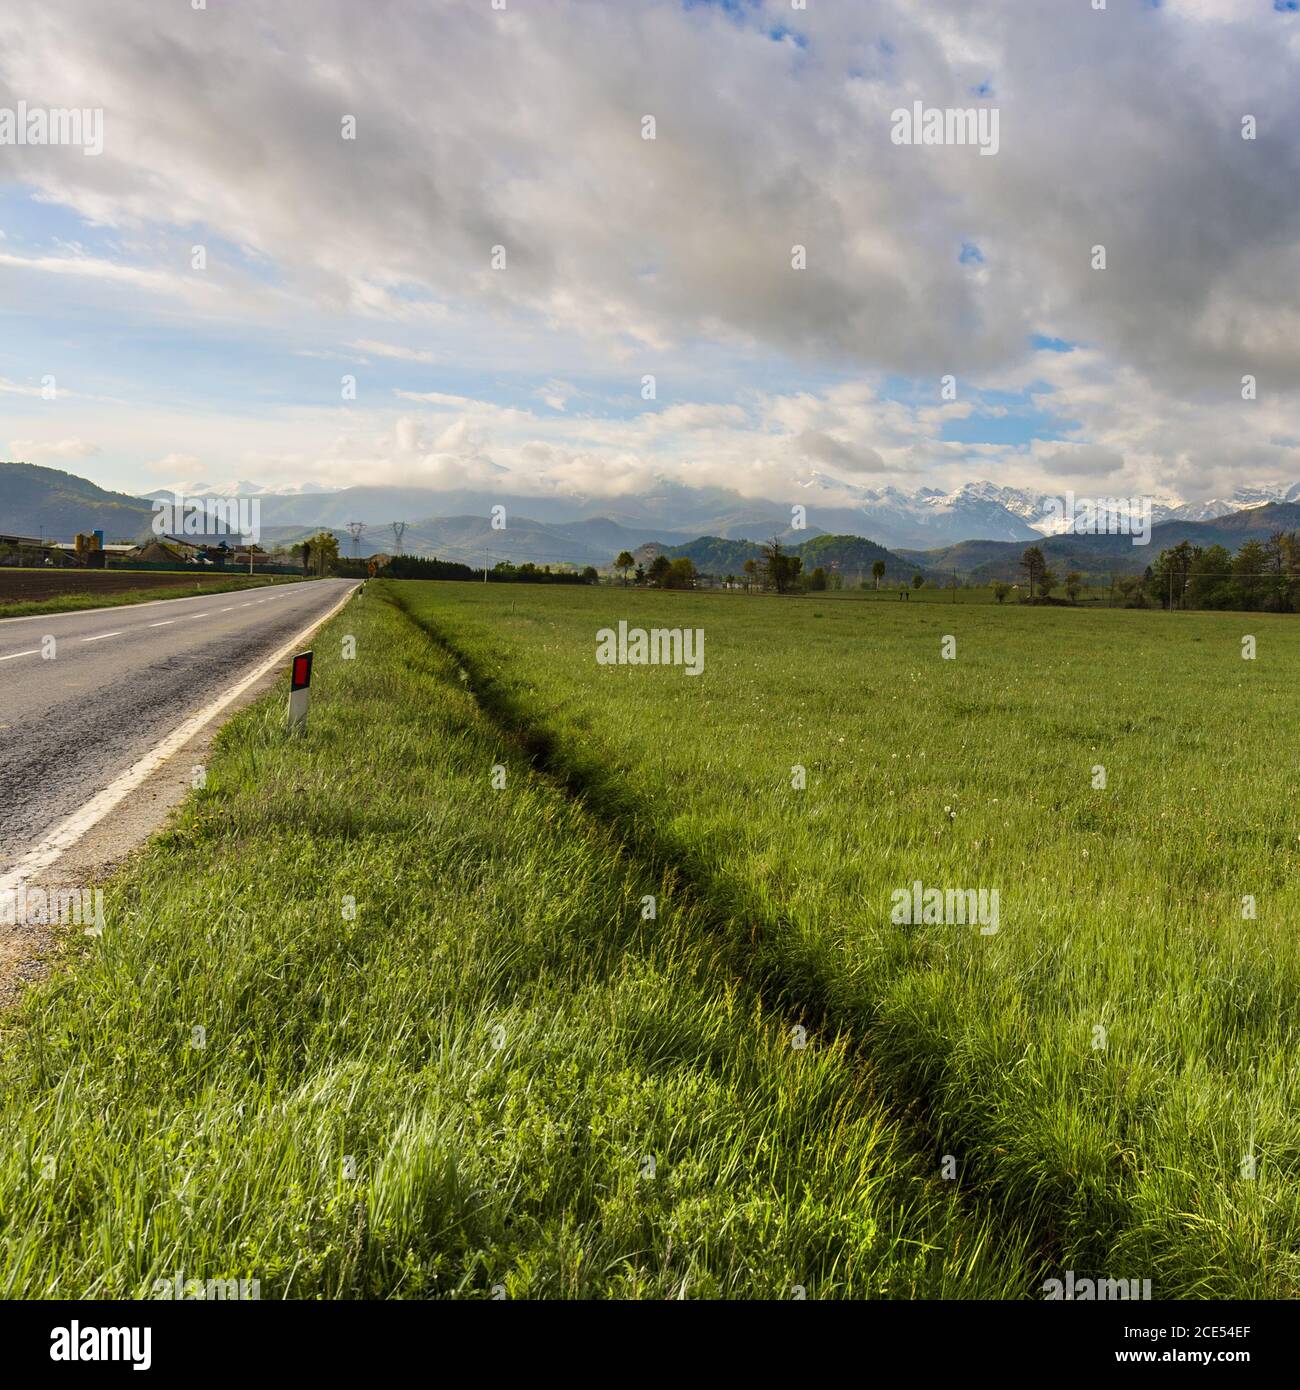 Mountain valley with road Stock Photo